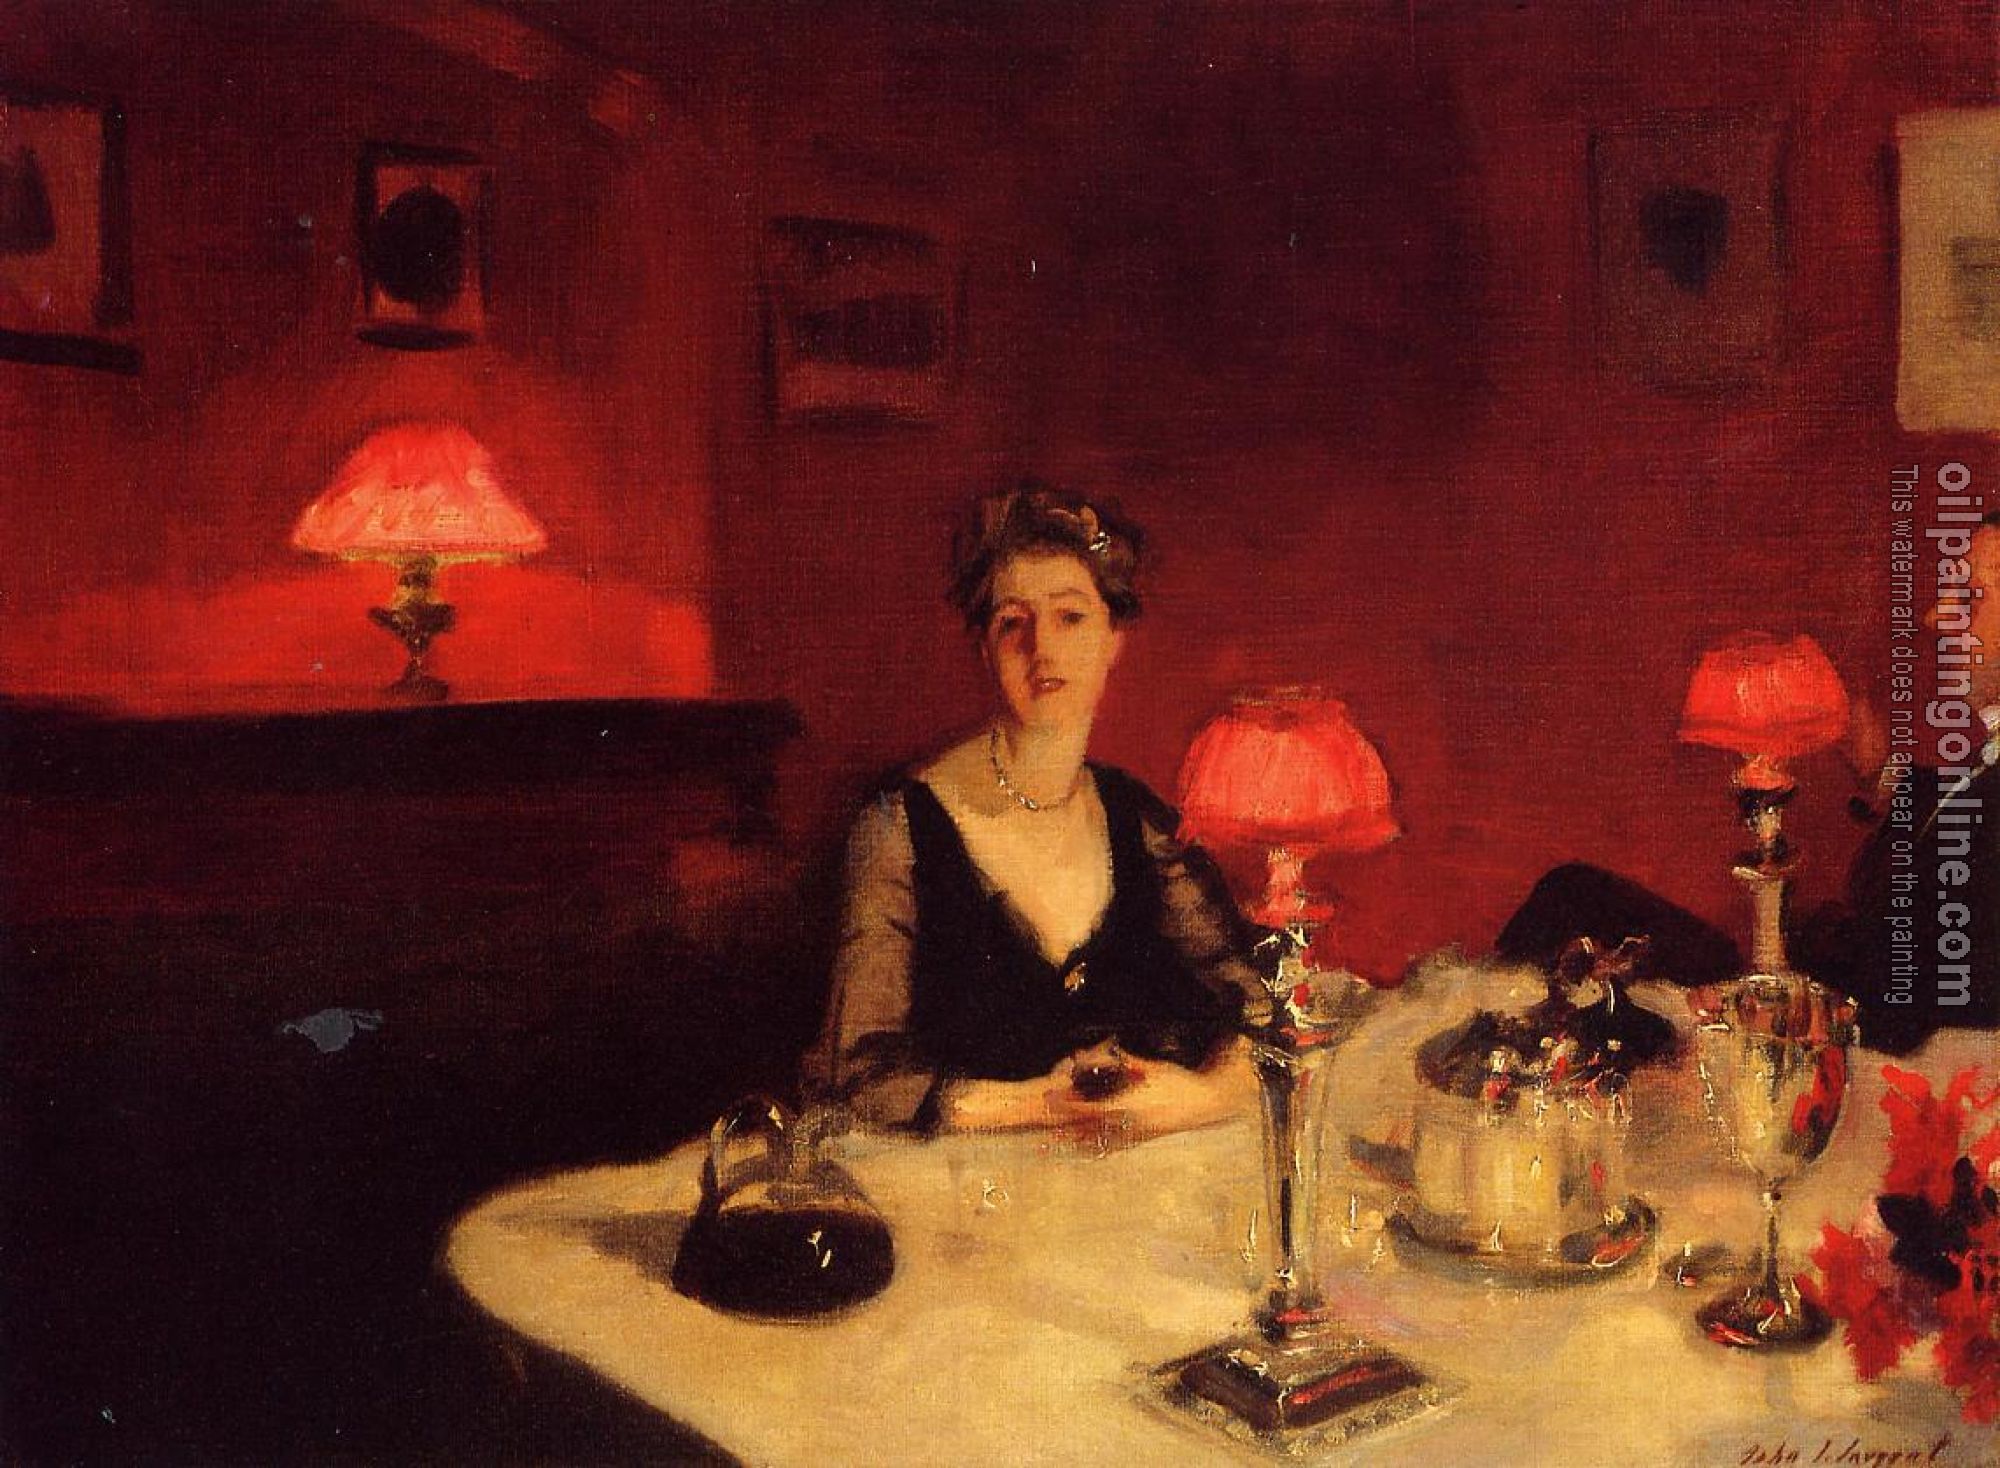 Sargent, John Singer - A Dinner Table at Night